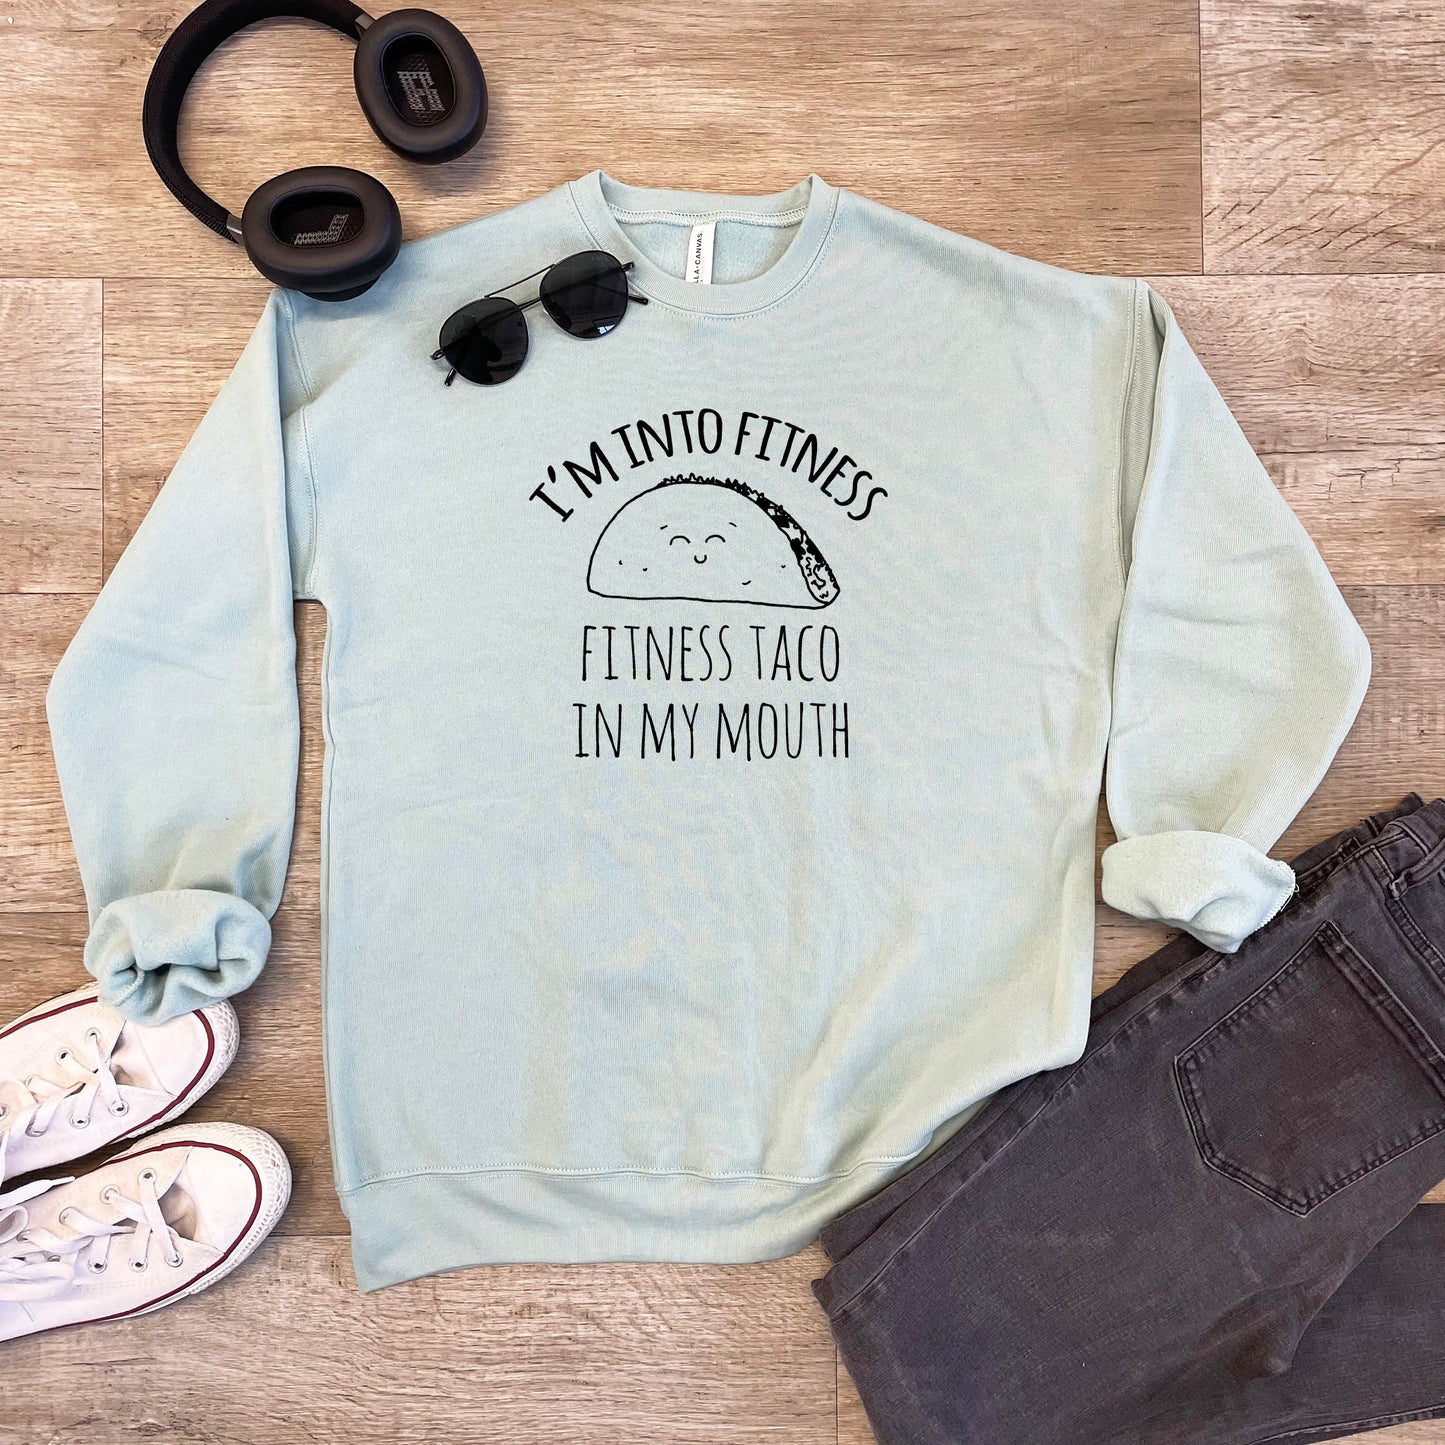 I'm Into Fitness, Fitness Taco In My Mouth - Unisex Sweatshirt - Heather Gray or Dusty Blue